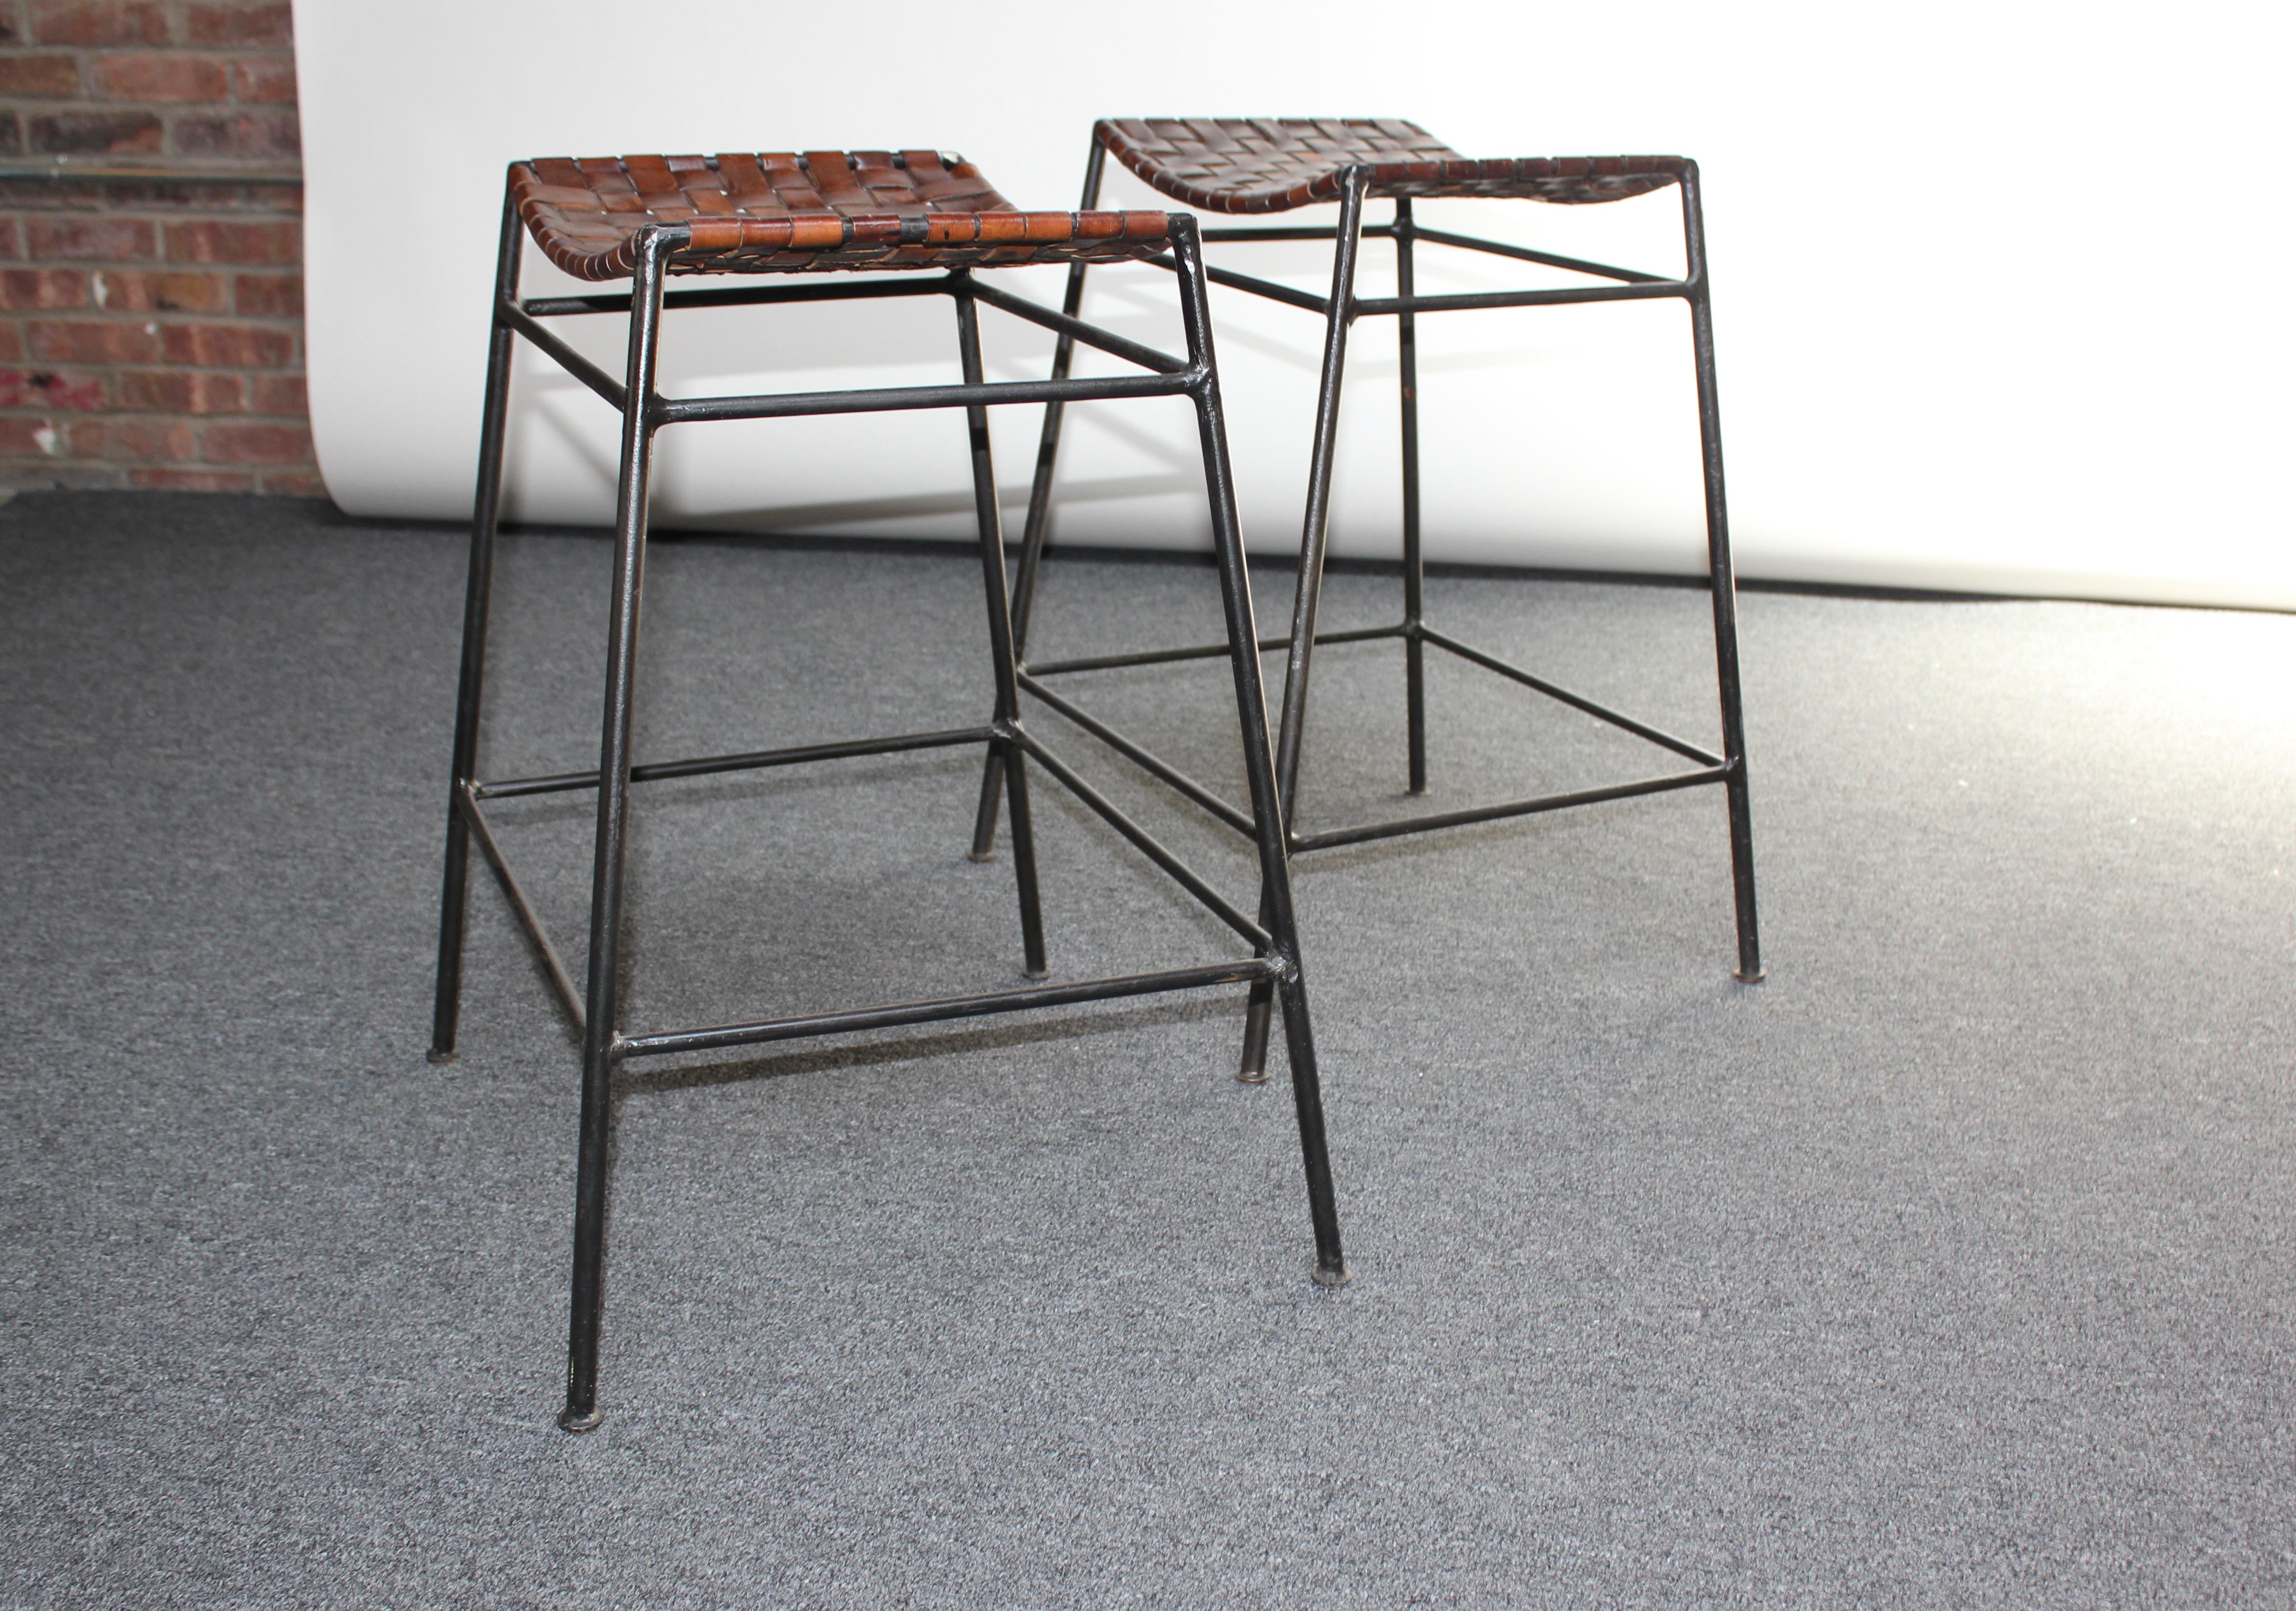 Pair of counter-height stools in iron and woven brown leather in the style of Swift and Monell (ca. 1980s, USA). Leather is richly patinated, showing wear from age and use, but sturdy and fully intact. Iron frames retain their original black paint,